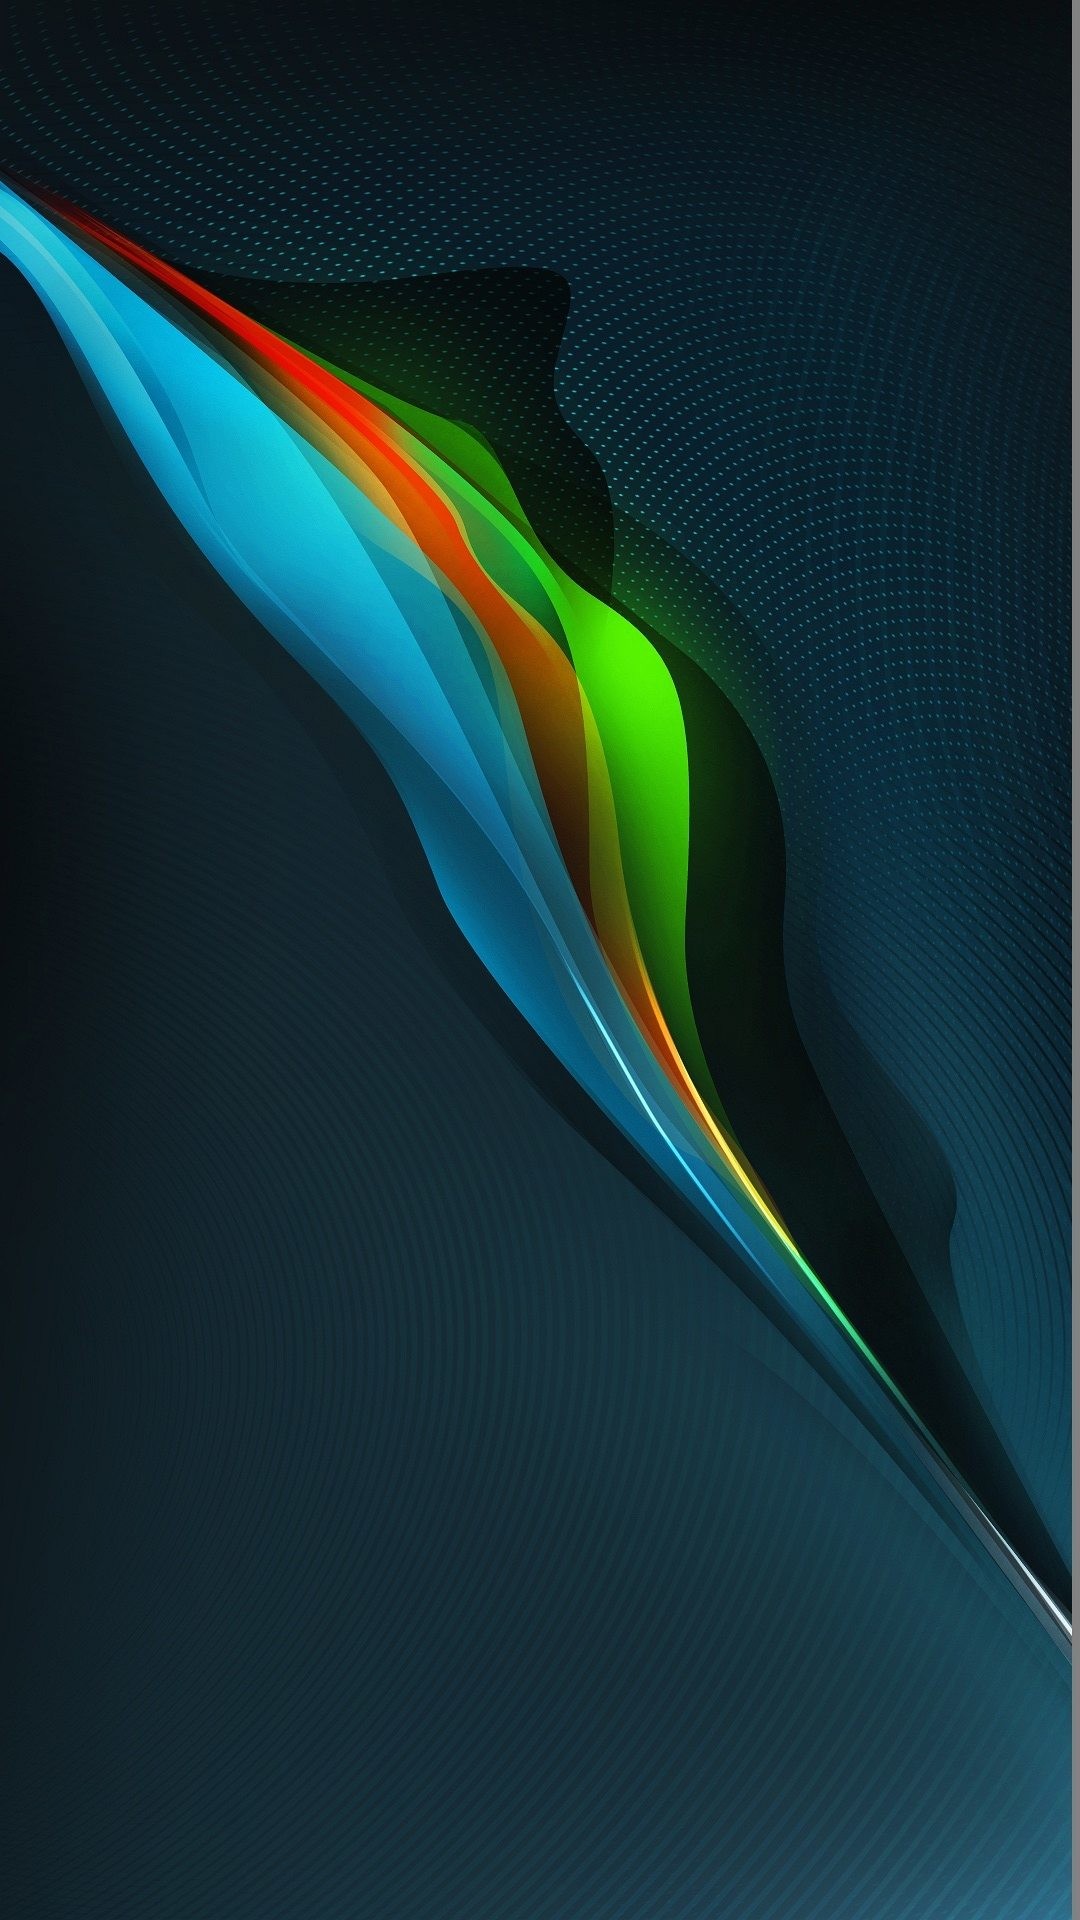 1080x1920 Z Wallpaper Full Hd 1080 X 1920 Smartphone Abstract Graphite And Colours -  1080 x 1920 - Full Hd 1080 X 1920 Smatphone Htc One Lumia 1520 Lg Galaxy  Awesome ...